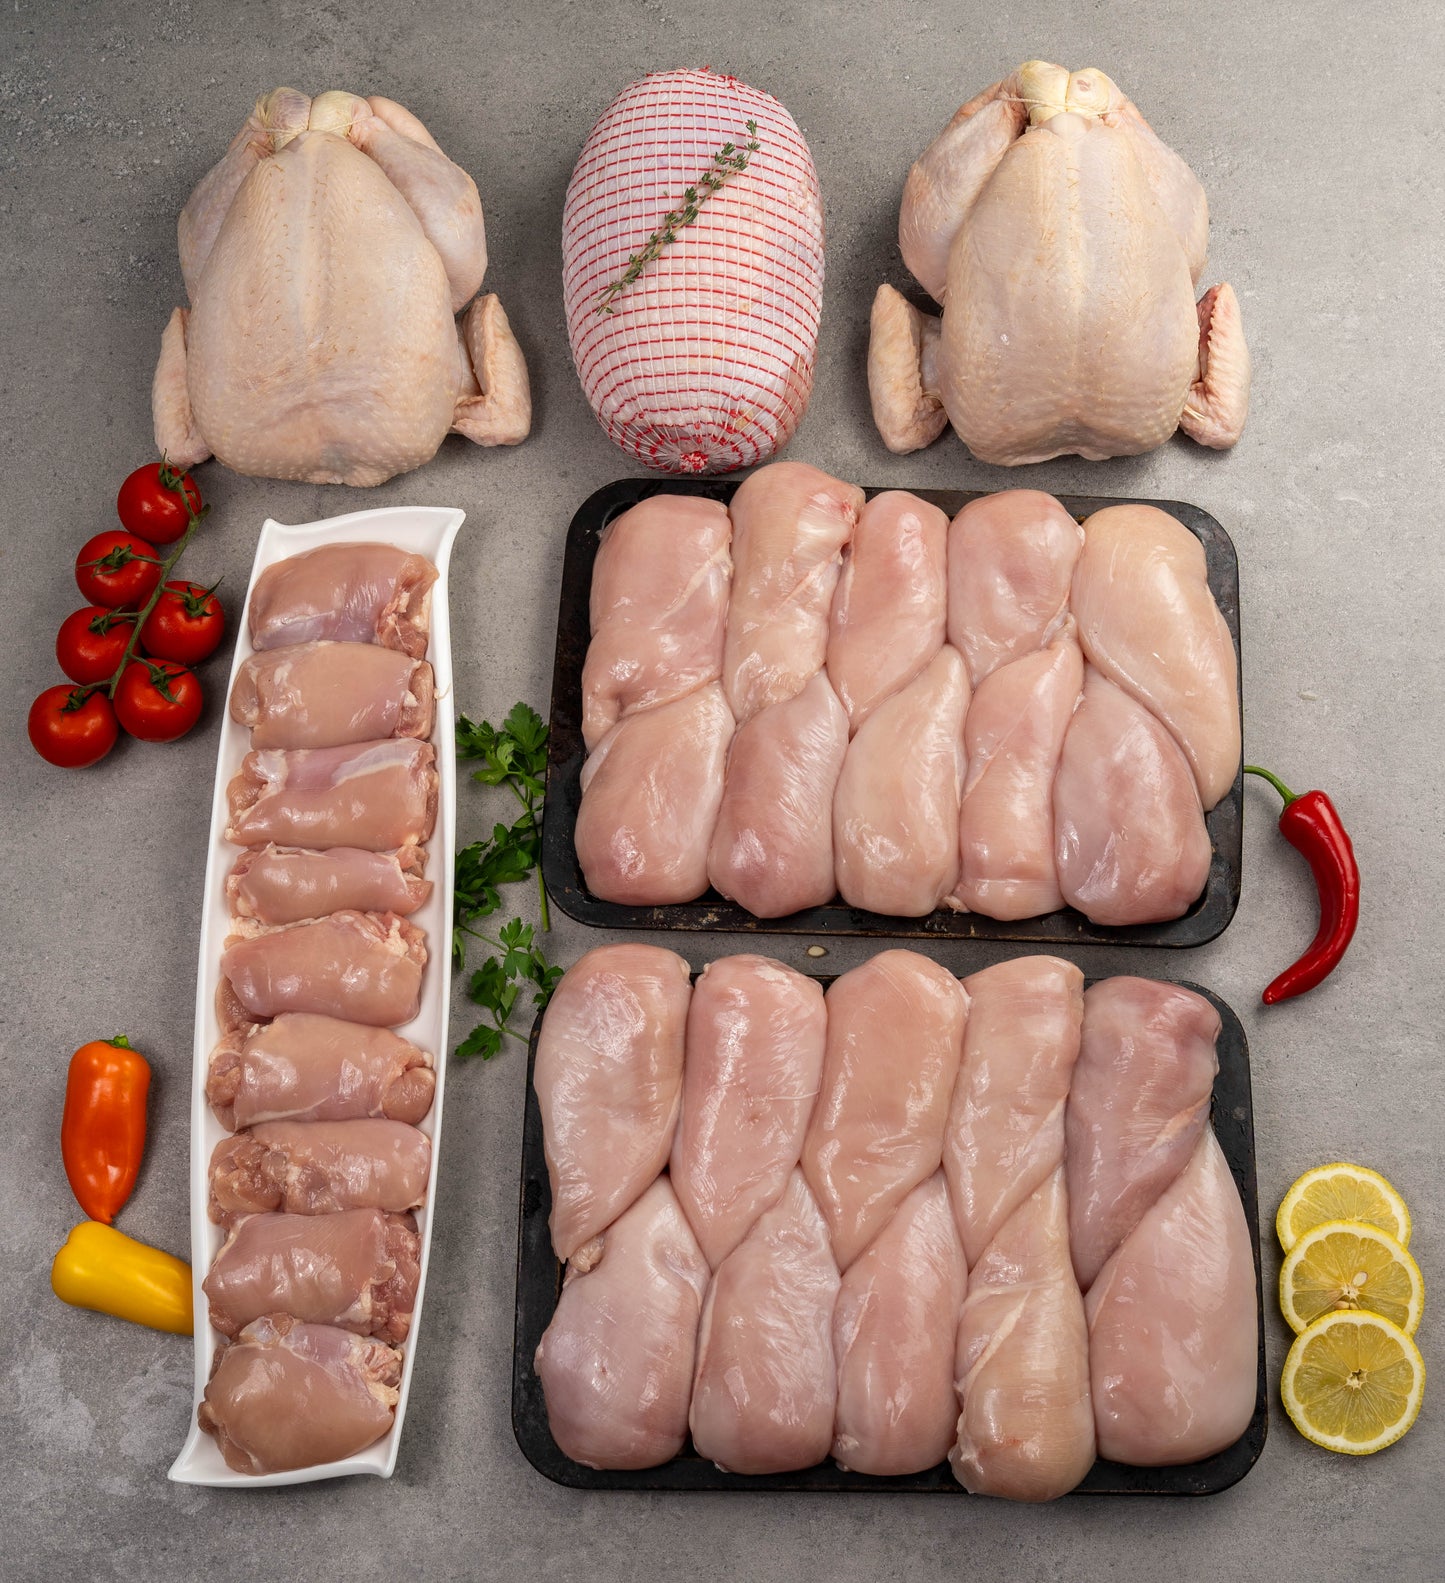 Poultry Pack